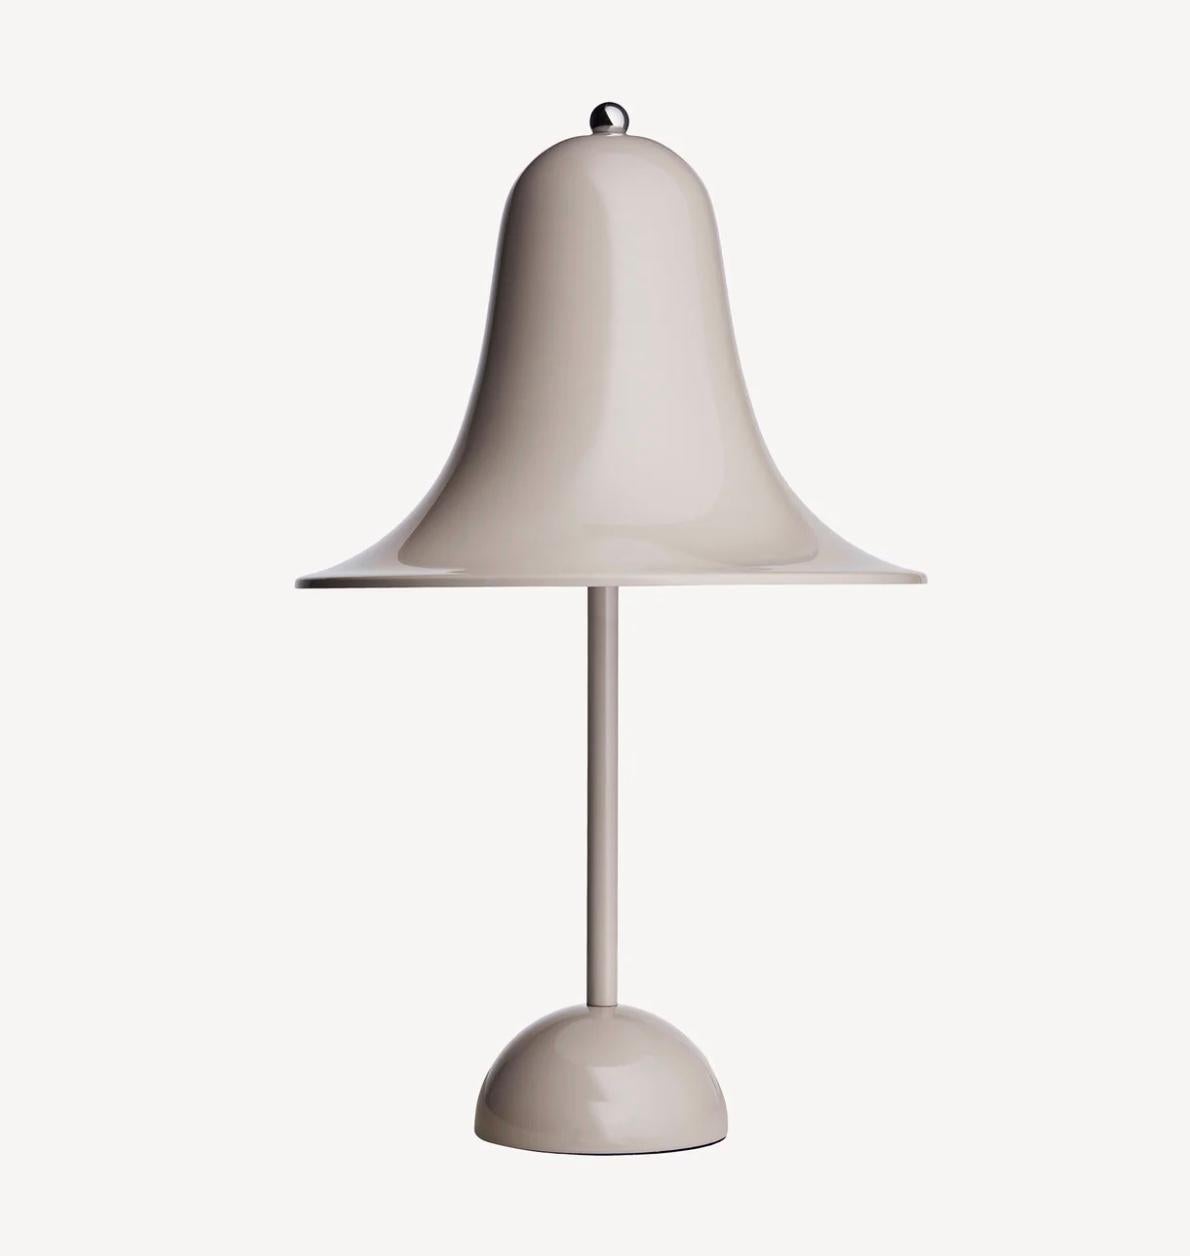 Contemporary Verner Panton 'Pantop' Table Lamp in 'Light Blue' 1980 for Verpan For Sale